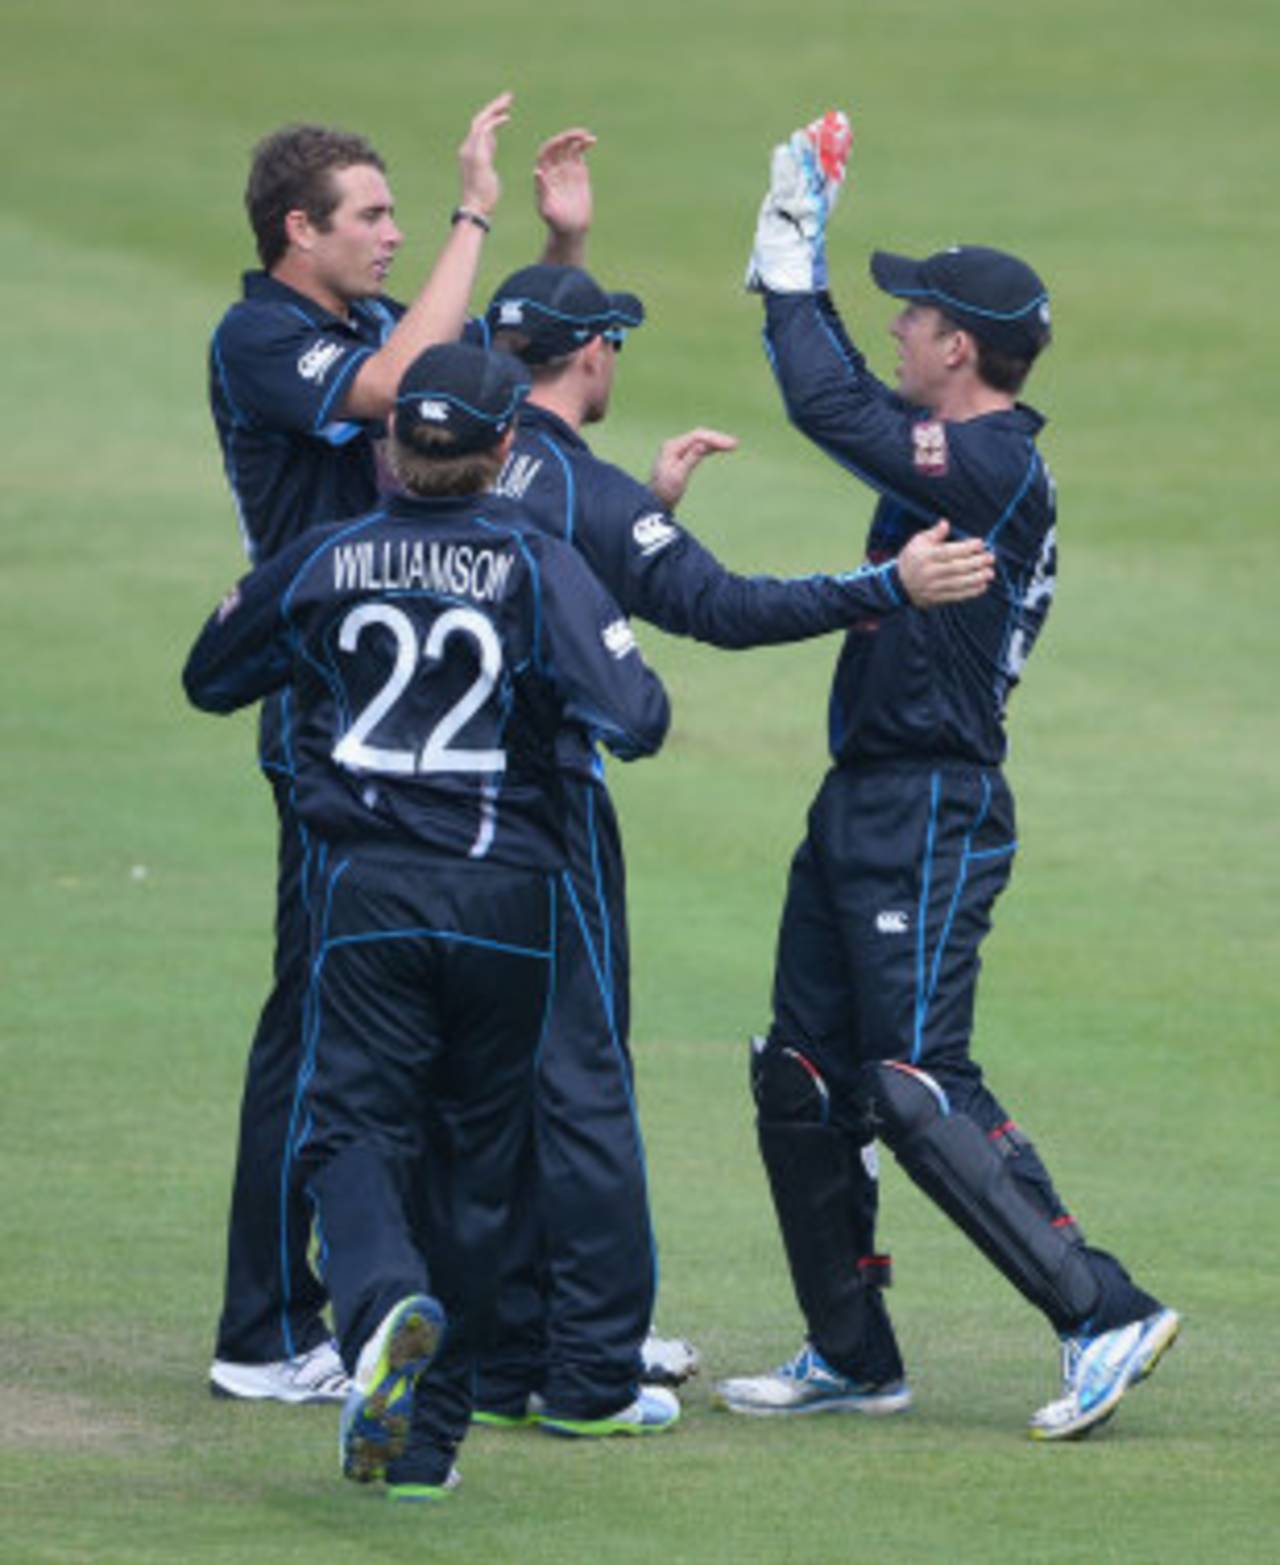 Tim Southee and Luke Ronchi combined for the first two wickets to fall, England v New Zealand, 1st ODI, Lord's, May 31, 2013